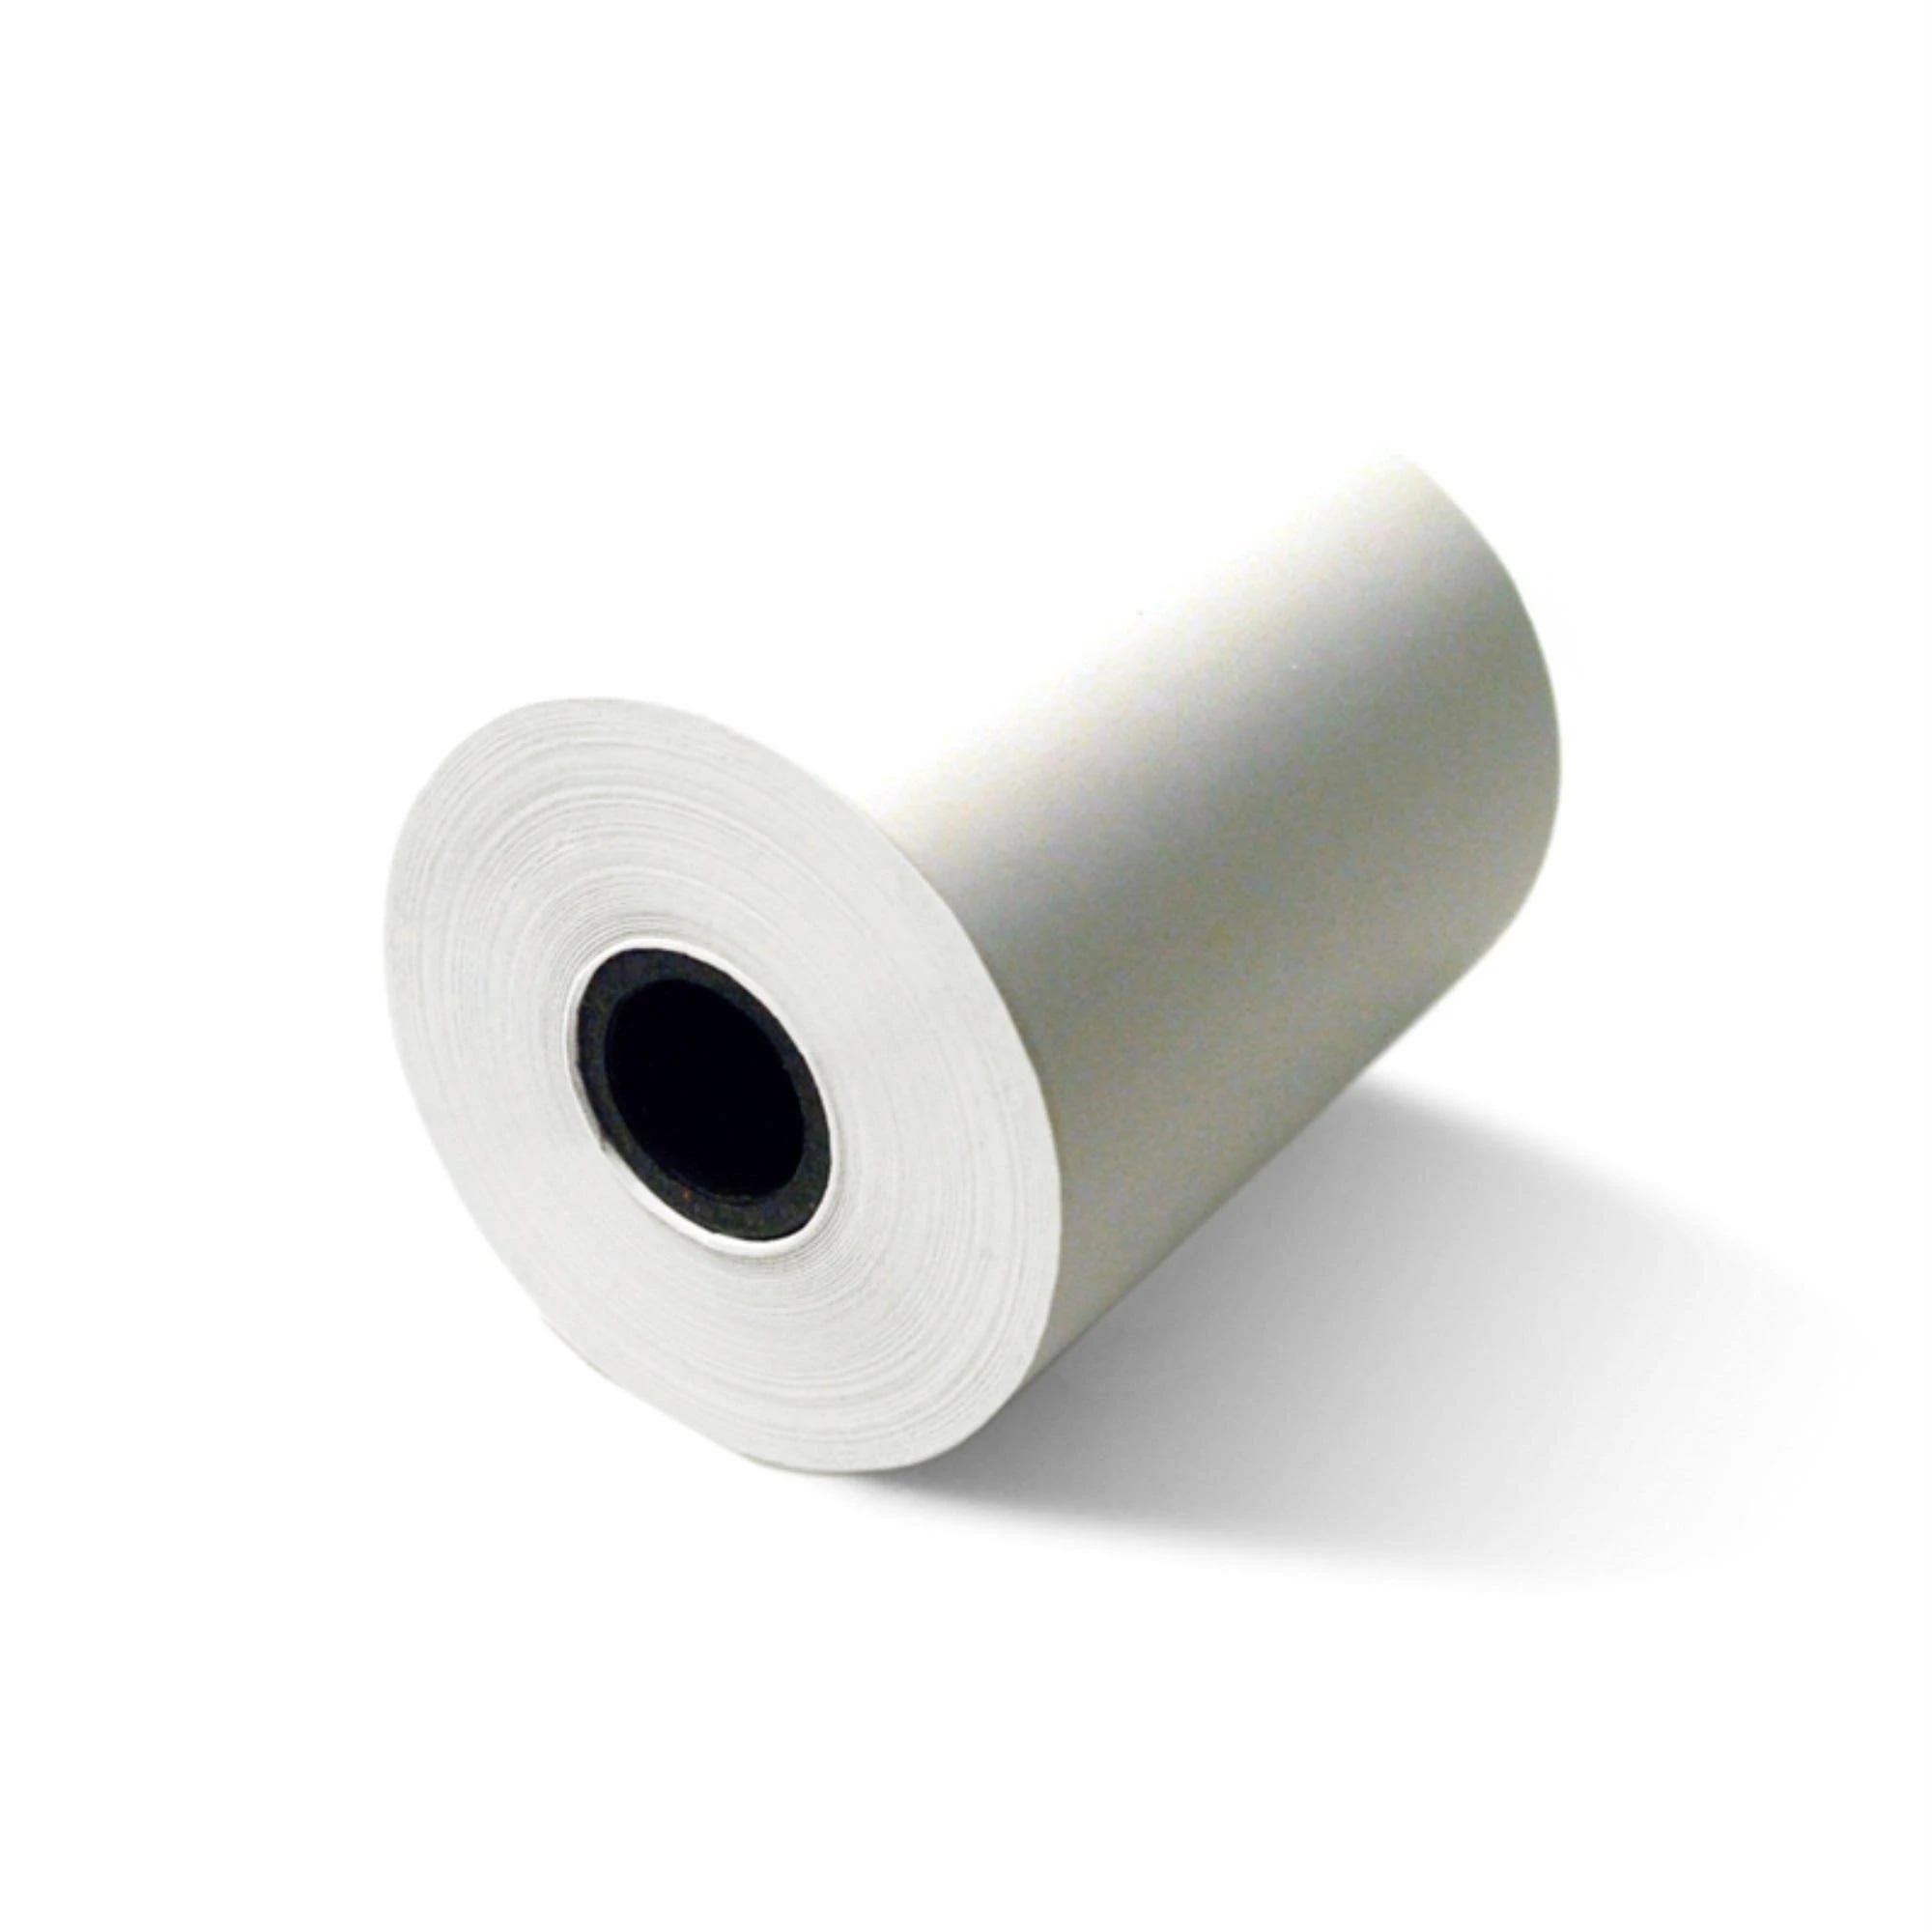 Nashua Thermal Receipt Paper - 2.25 in. W x 50 ft. L Single | Image